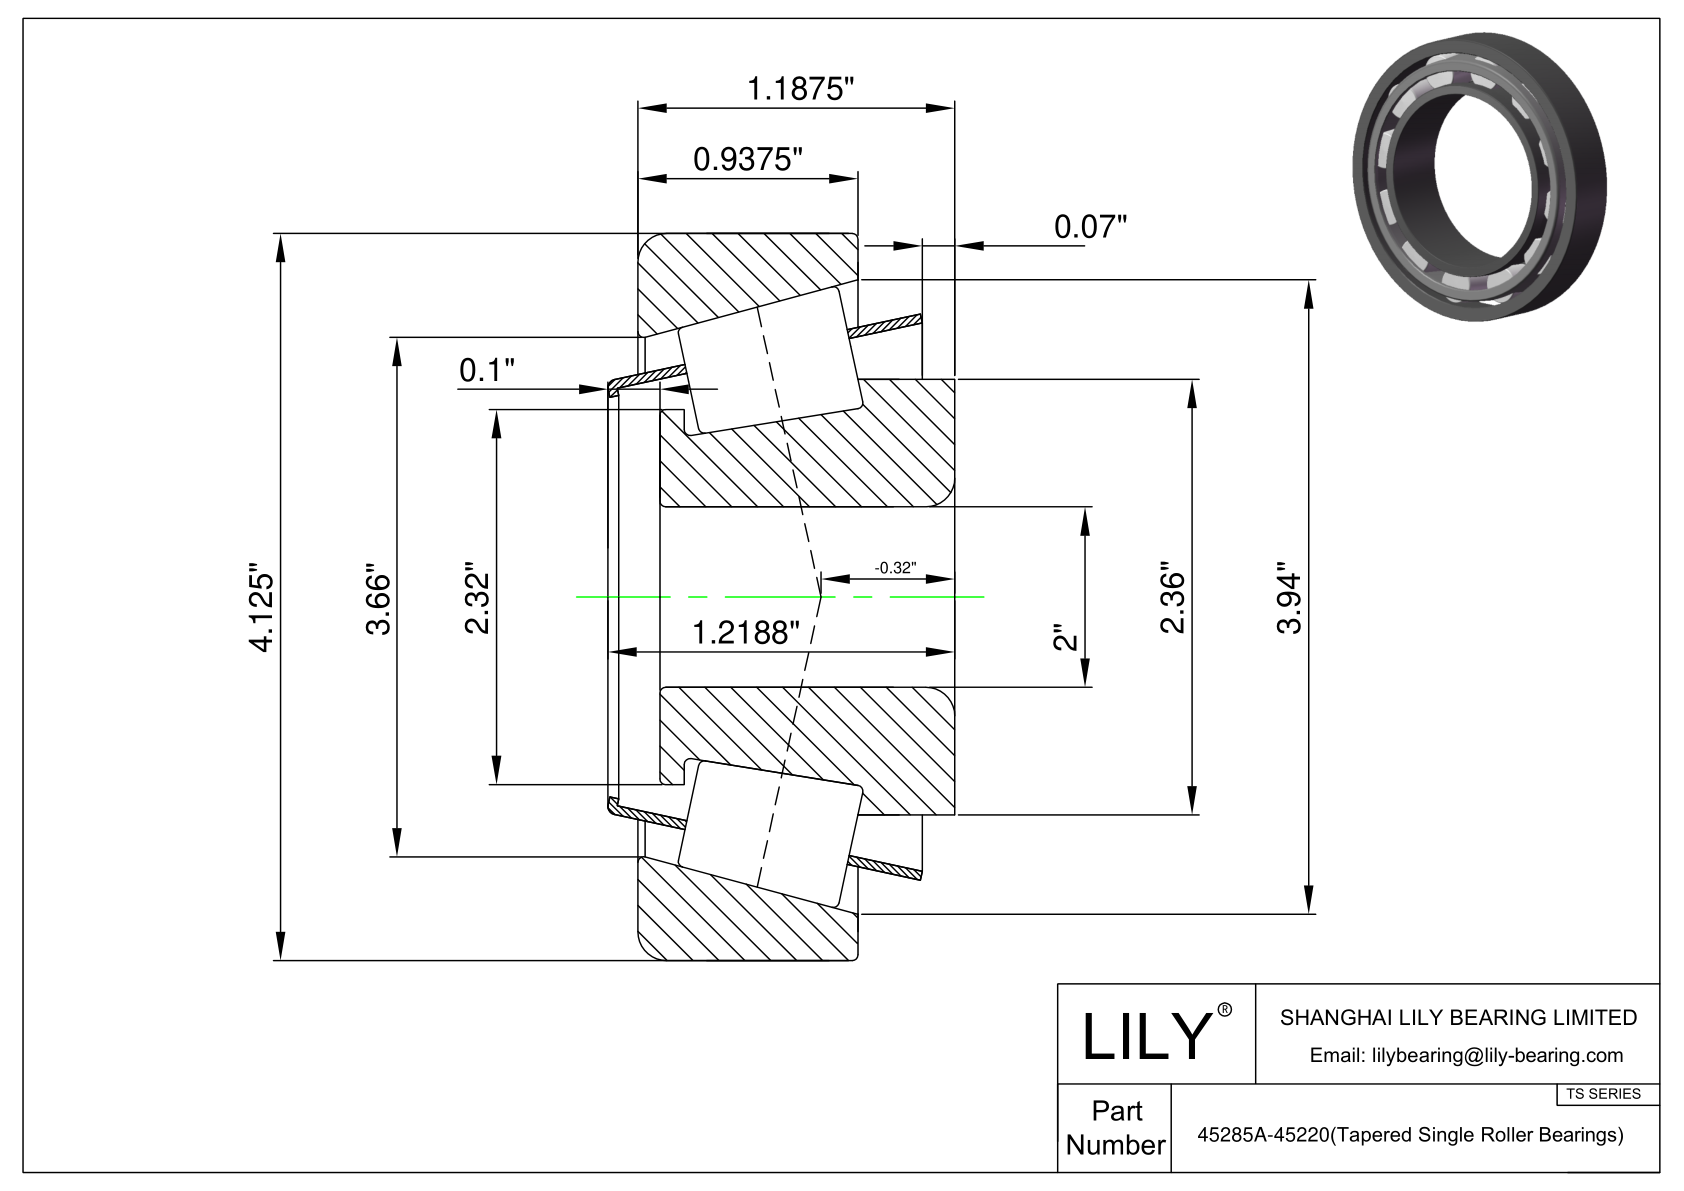 45285A-45220 TS (Tapered Single Roller Bearings) (Imperial) cad drawing